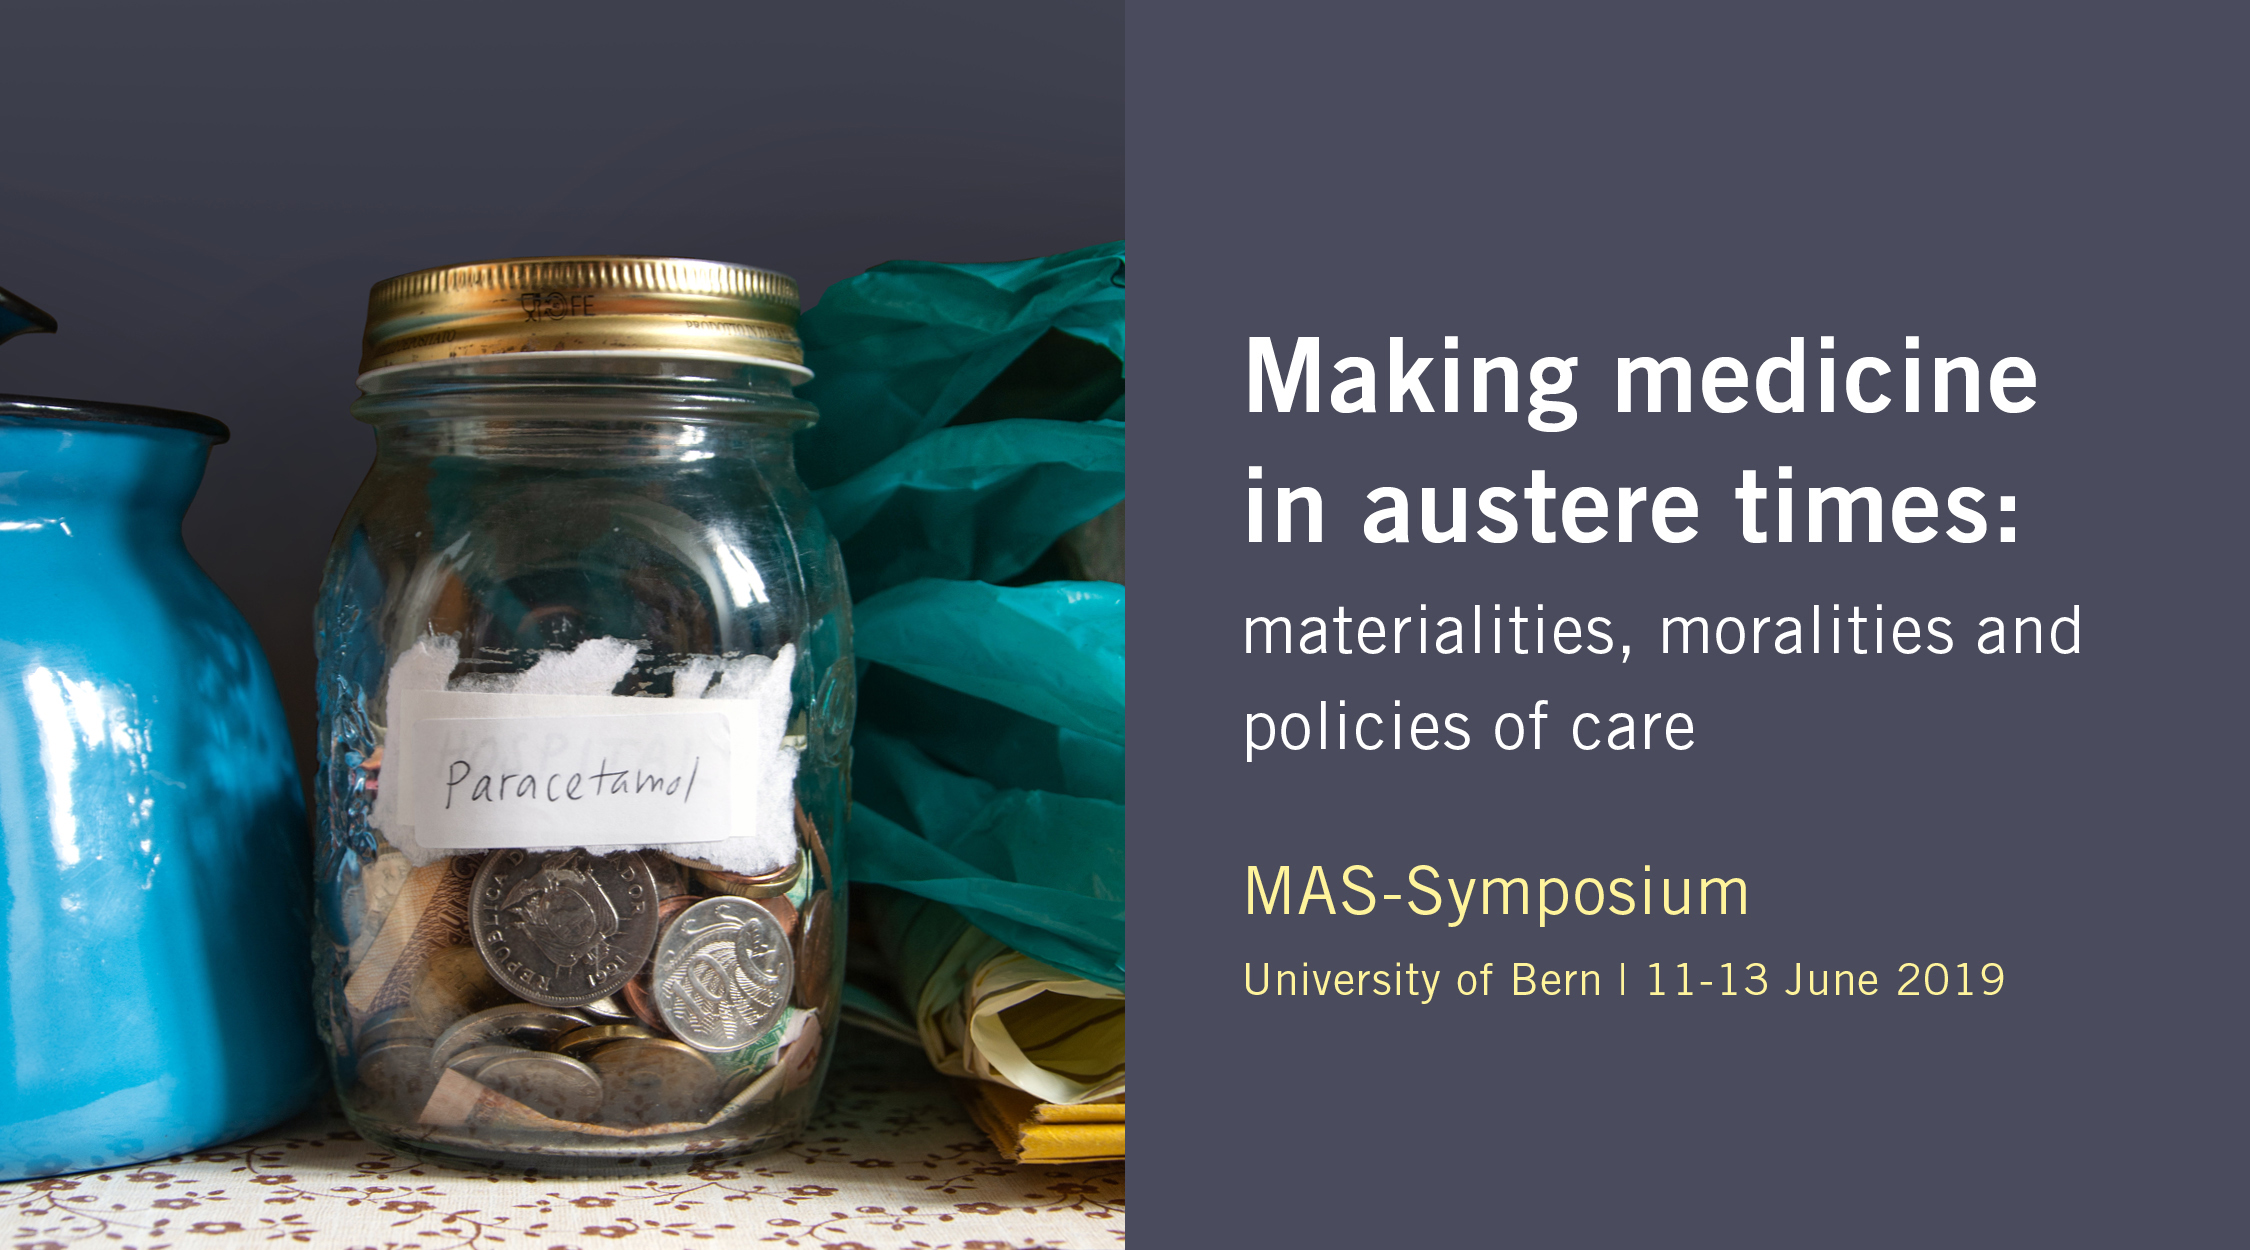 Symposium 'Making medicine in austere times'